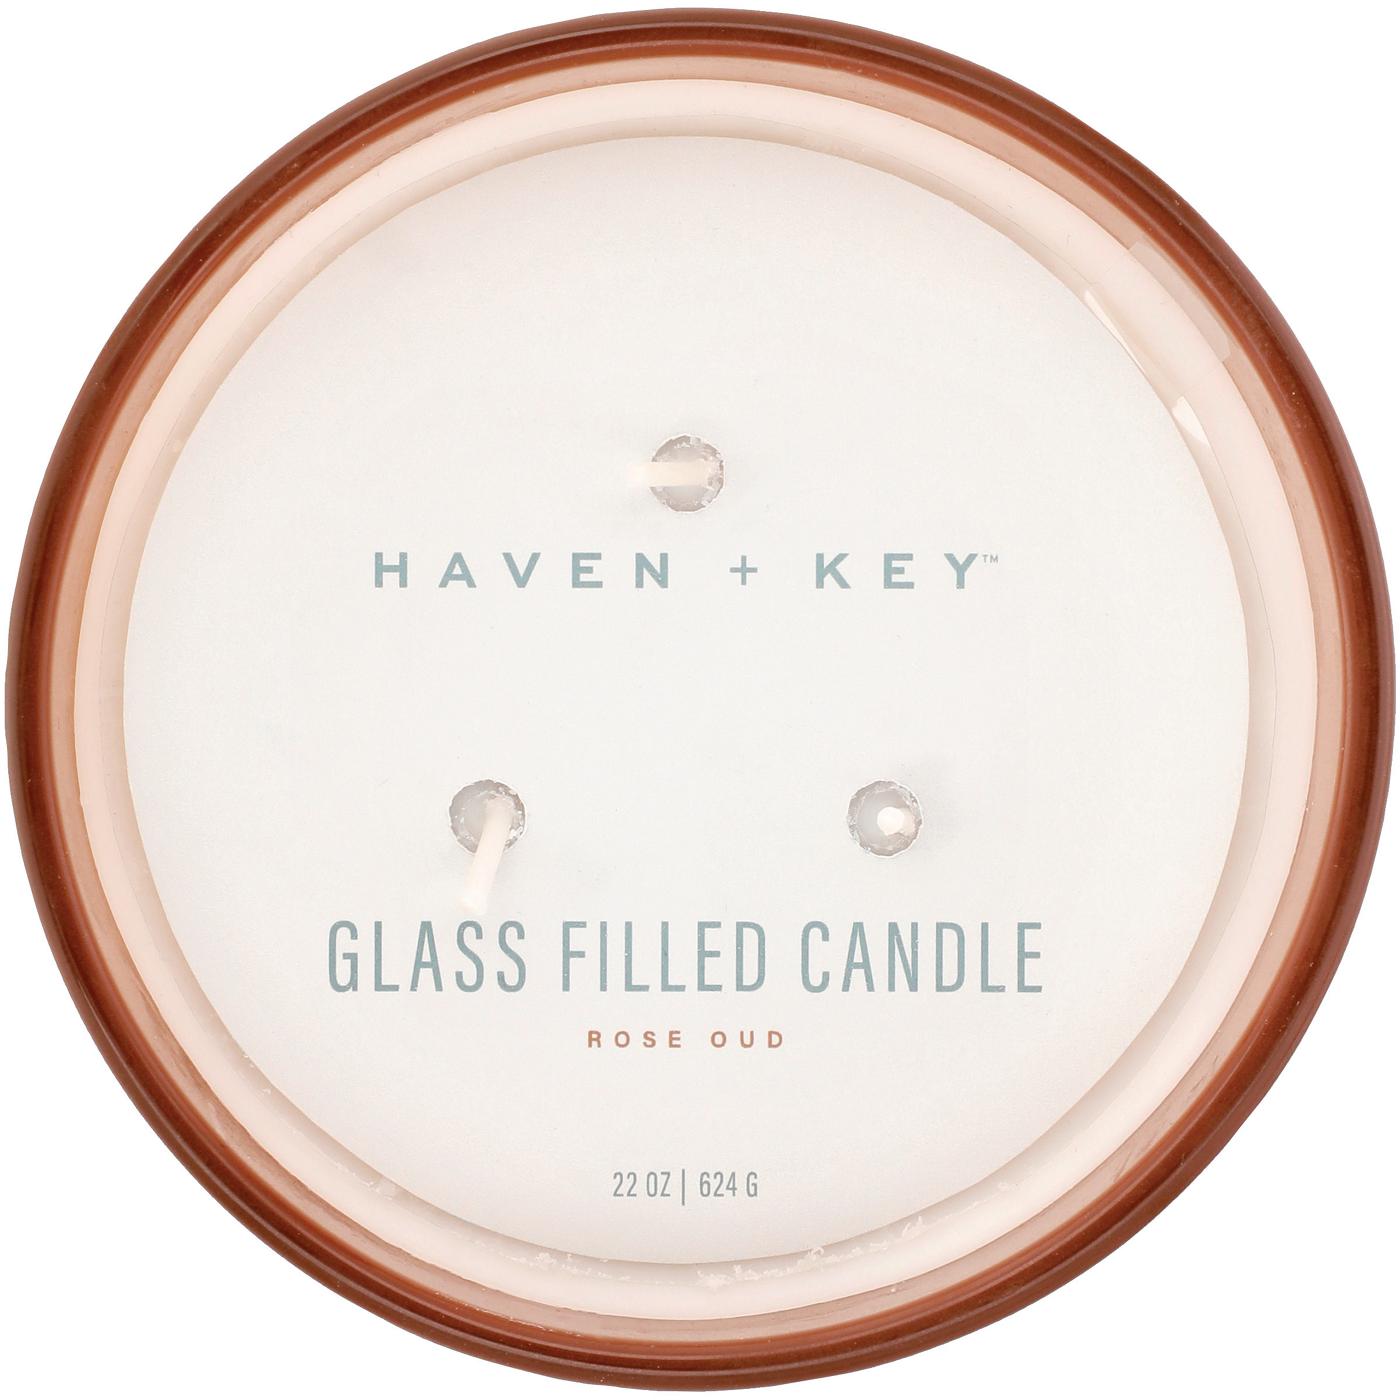 Haven + Key Rose Oud Scented Candle; image 2 of 2